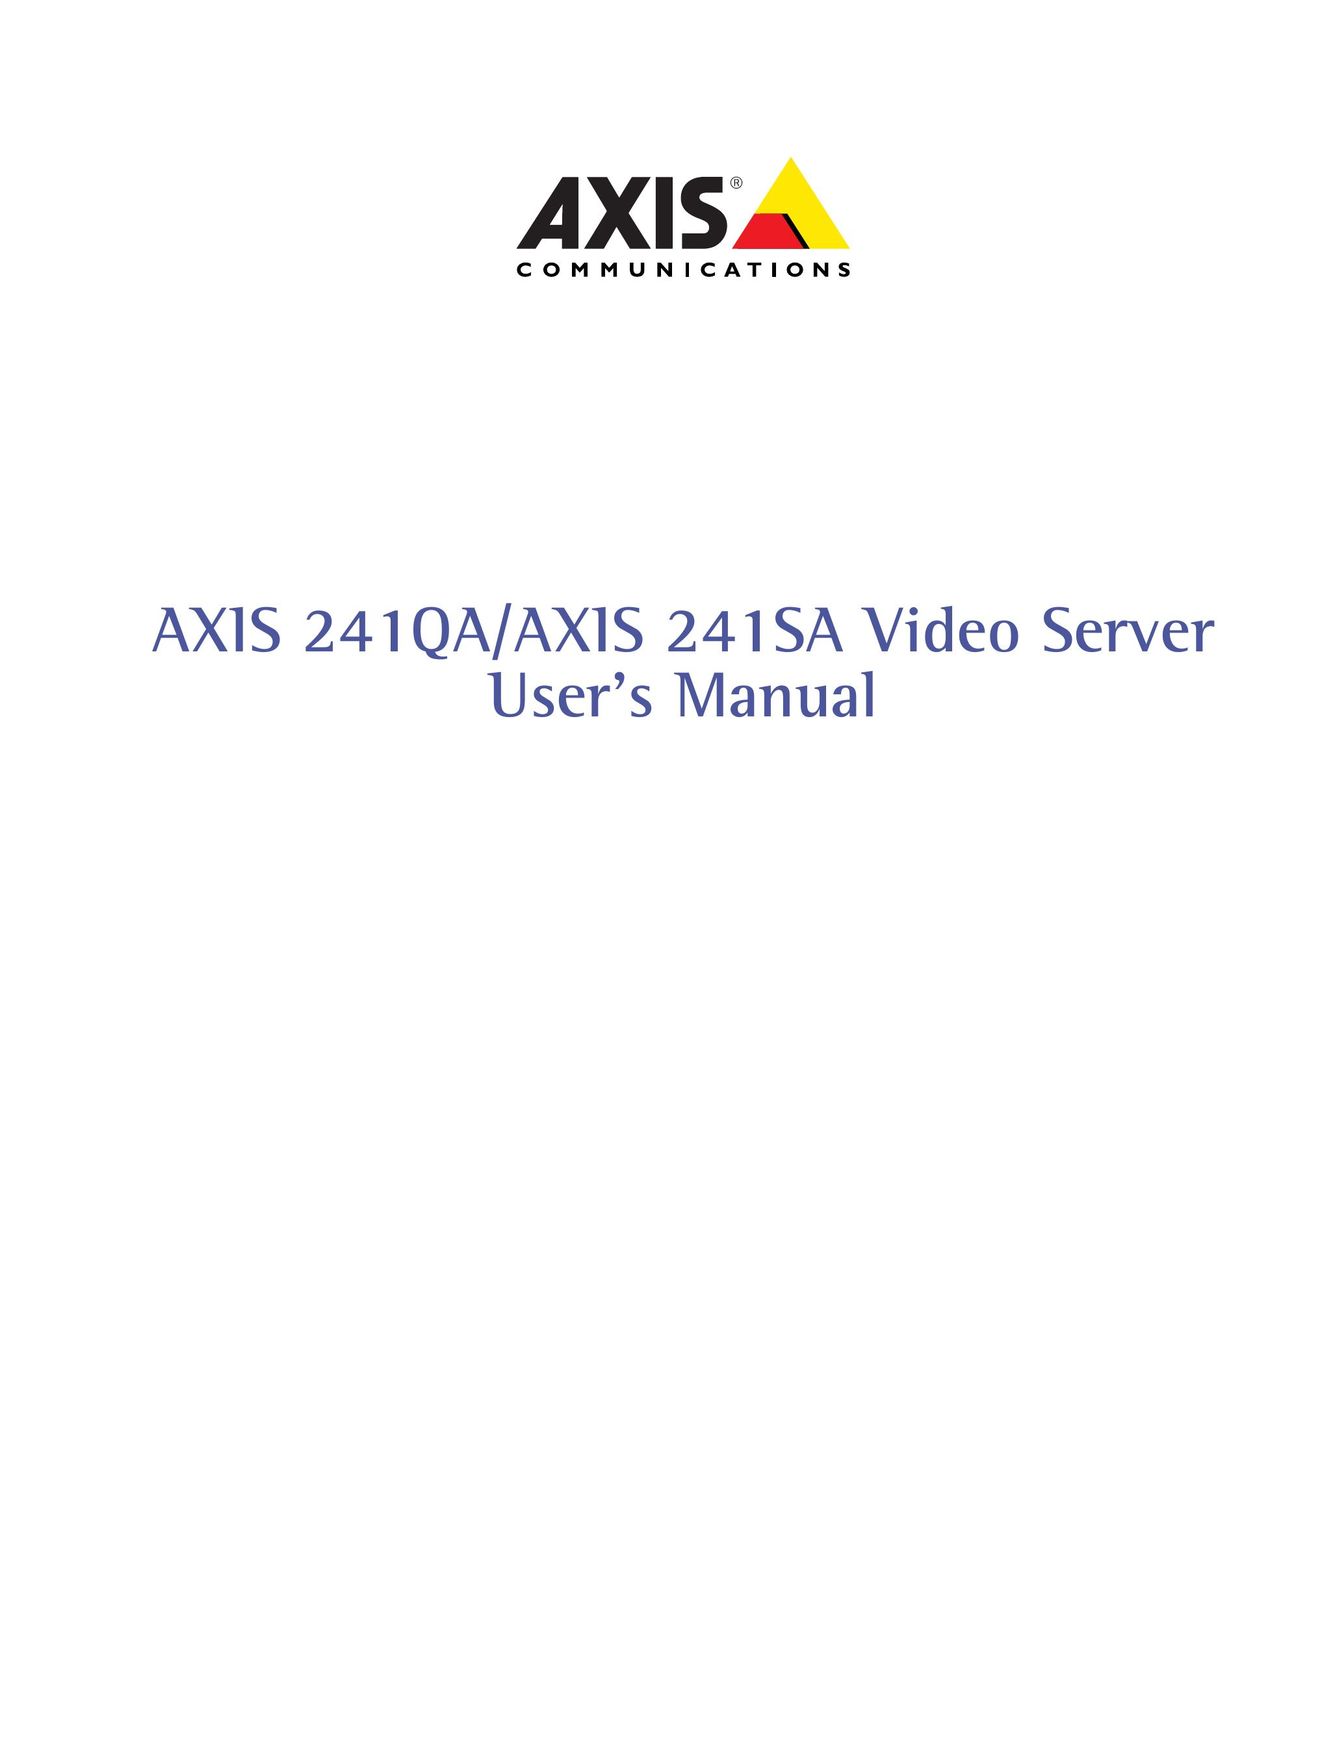 Axis Communications AXIS 241QA Home Theater Server User Manual